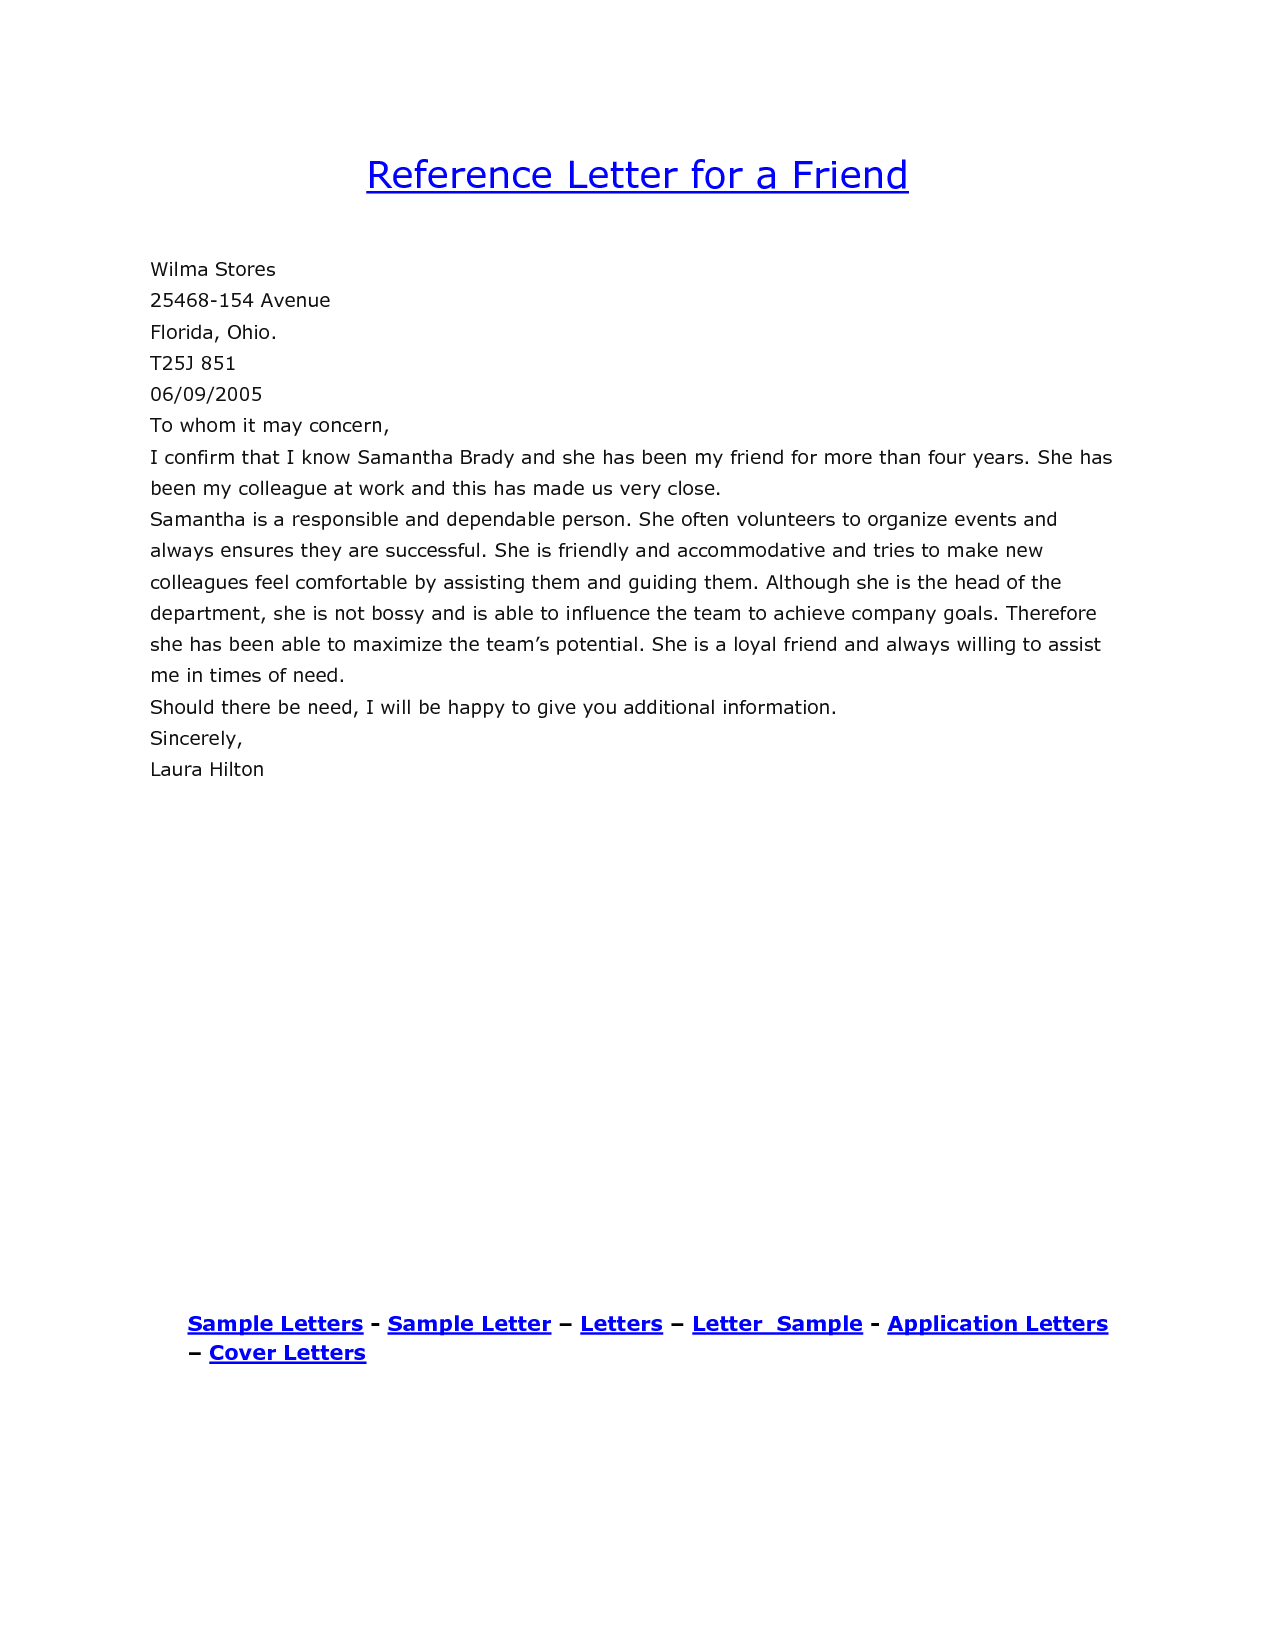 Reference Letter Sample For A Friend Yahoo Search Results inside proportions 1275 X 1650